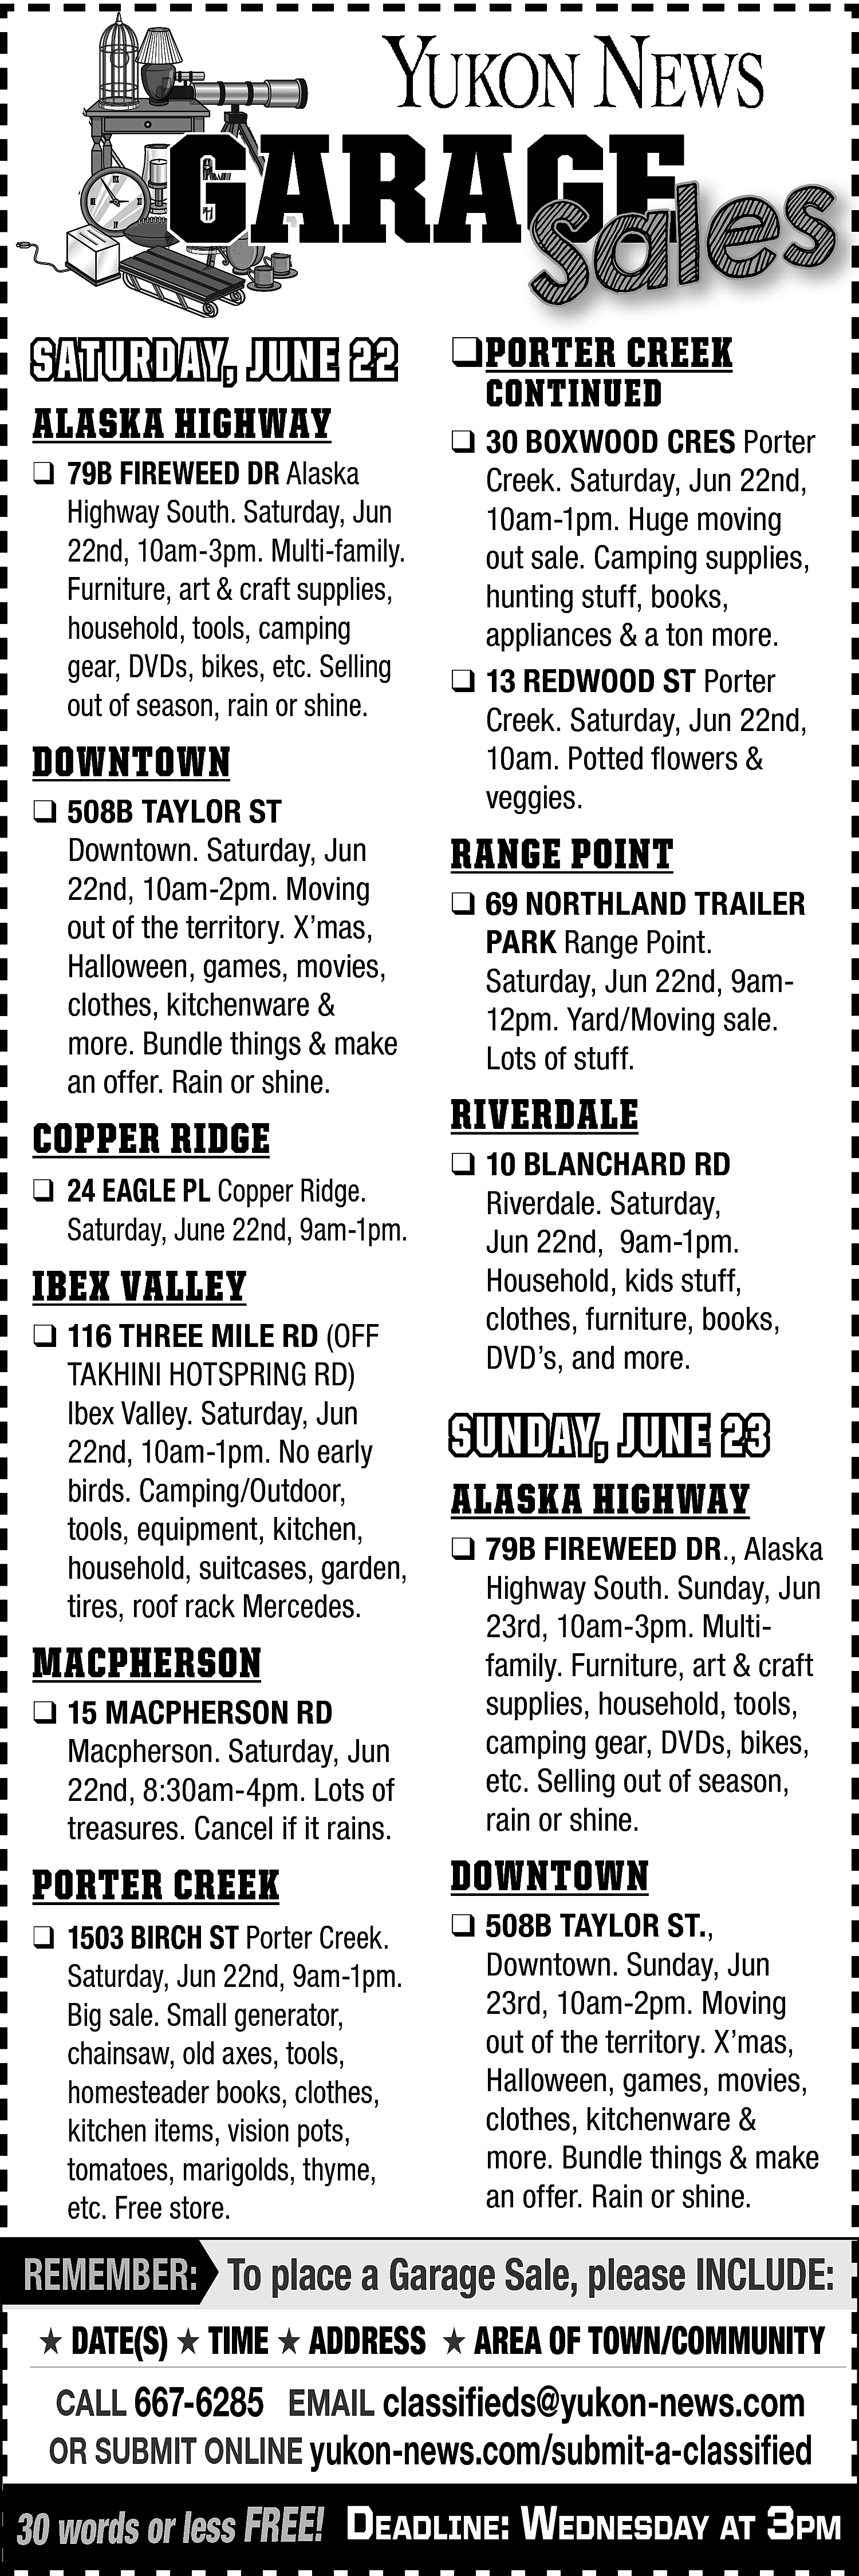 GARAGE <br>GE <br>Sales <br> <br>SATURDAY,  GARAGE  GE  Sales    SATURDAY, JUNE 22  ALASKA HIGHWAY    ❑ 79B FIREWEED DR Alaska  Highway South. Saturday, Jun  22nd, 10am-3pm. Multi-family.  Furniture, art & craft supplies,  household, tools, camping  gear, DVDs, bikes, etc. Selling  out of season, rain or shine.    DOWNTOWN  ❑ 508B TAYLOR ST  Downtown. Saturday, Jun  22nd, 10am-2pm. Moving  out of the territory. X’mas,  Halloween, games, movies,  clothes, kitchenware &  more. Bundle things & make  an offer. Rain or shine.    COPPER RIDGE  ❑ 24 EAGLE PL Copper Ridge.  Saturday, June 22nd, 9am-1pm.    IBEX VALLEY  ❑ 116 THREE MILE RD (OFF  TAKHINI HOTSPRING RD)  Ibex Valley. Saturday, Jun  22nd, 10am-1pm. No early  birds. Camping/Outdoor,  tools, equipment, kitchen,  household, suitcases, garden,  tires, roof rack Mercedes.    MACPHERSON  ❑ 15 MACPHERSON RD  Macpherson. Saturday, Jun  22nd, 8:30am-4pm. Lots of  treasures. Cancel if it rains.    PORTER CREEK  ❑ 1503 BIRCH ST Porter Creek.  Saturday, Jun 22nd, 9am-1pm.  Big sale. Small generator,  chainsaw, old axes, tools,  homesteader books, clothes,  kitchen items, vision pots,  tomatoes, marigolds, thyme,  etc. Free store.    ❑PORTER CREEK  CONTINUED    ❑ 30 BOXWOOD CRES Porter  Creek. Saturday, Jun 22nd,  10am-1pm. Huge moving  out sale. Camping supplies,  hunting stuff, books,  appliances & a ton more.  ❑ 13 REDWOOD ST Porter  Creek. Saturday, Jun 22nd,  10am. Potted flowers &  veggies.    RANGE POINT  ❑ 69 NORTHLAND TRAILER  PARK Range Point.  Saturday, Jun 22nd, 9am12pm. Yard/Moving sale.  Lots of stuff.    RIVERDALE  ❑ 10 BLANCHARD RD  Riverdale. Saturday,  Jun 22nd, 9am-1pm.  Household, kids stuff,  clothes, furniture, books,  DVD’s, and more.    SUNDAY, JUNE 23  ALASKA HIGHWAY  ❑ 79B FIREWEED DR., Alaska  Highway South. Sunday, Jun  23rd, 10am-3pm. Multifamily. Furniture, art & craft  supplies, household, tools,  camping gear, DVDs, bikes,  etc. Selling out of season,  rain or shine.    DOWNTOWN  ❑ 508B TAYLOR ST.,  Downtown. Sunday, Jun  23rd, 10am-2pm. Moving  out of the territory. X’mas,  Halloween, games, movies,  clothes, kitchenware &  more. Bundle things & make  an offer. Rain or shine.    REMEMBER: To place a Garage Sale, please INCLUDE:  ★ DATE(S) ★ TIME ★ ADDRESS ★ AREA OF TOWN/COMMUNITY    CALL 667-6285 EMAIL classifieds@yukon-news.com  OR SUBMIT ONLINE yukon-news.com/submit-a-classified    30 words or less FREE! DeaDline: WeDnesDay at 3pm    